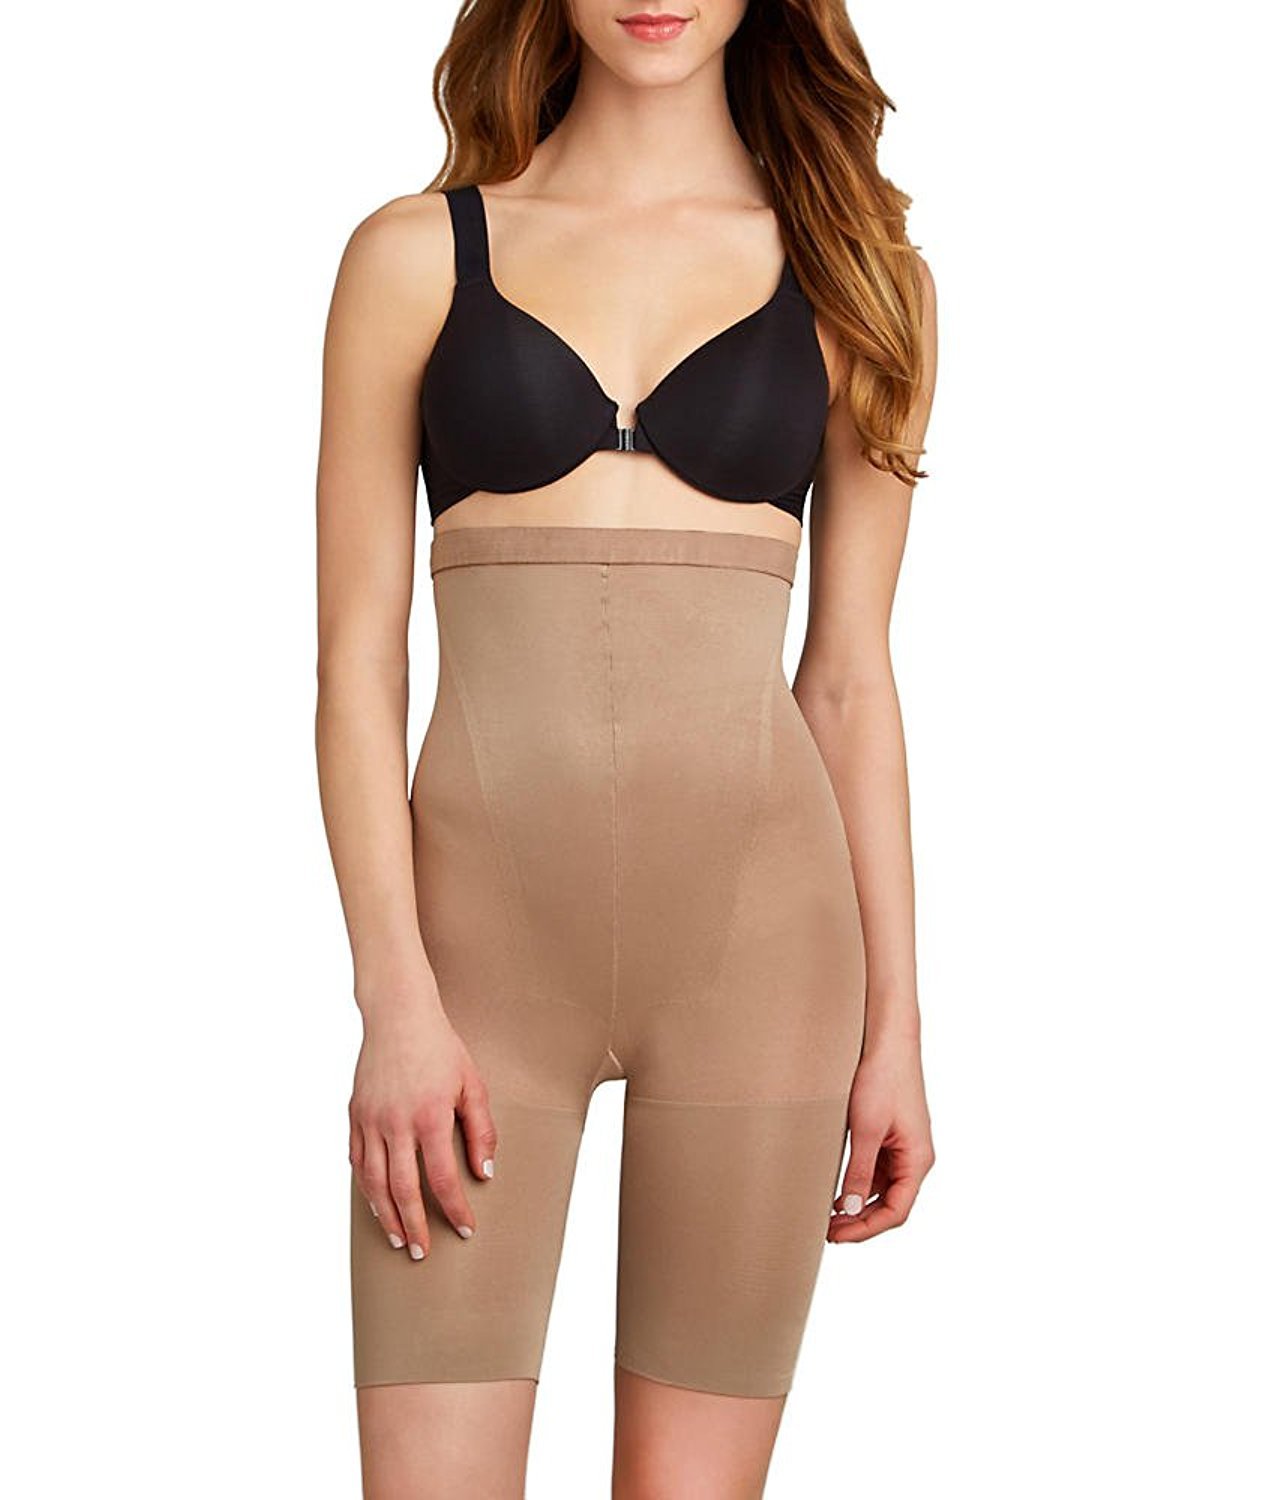 Spanx Super Power Panties Thigh and Tummy Control in 